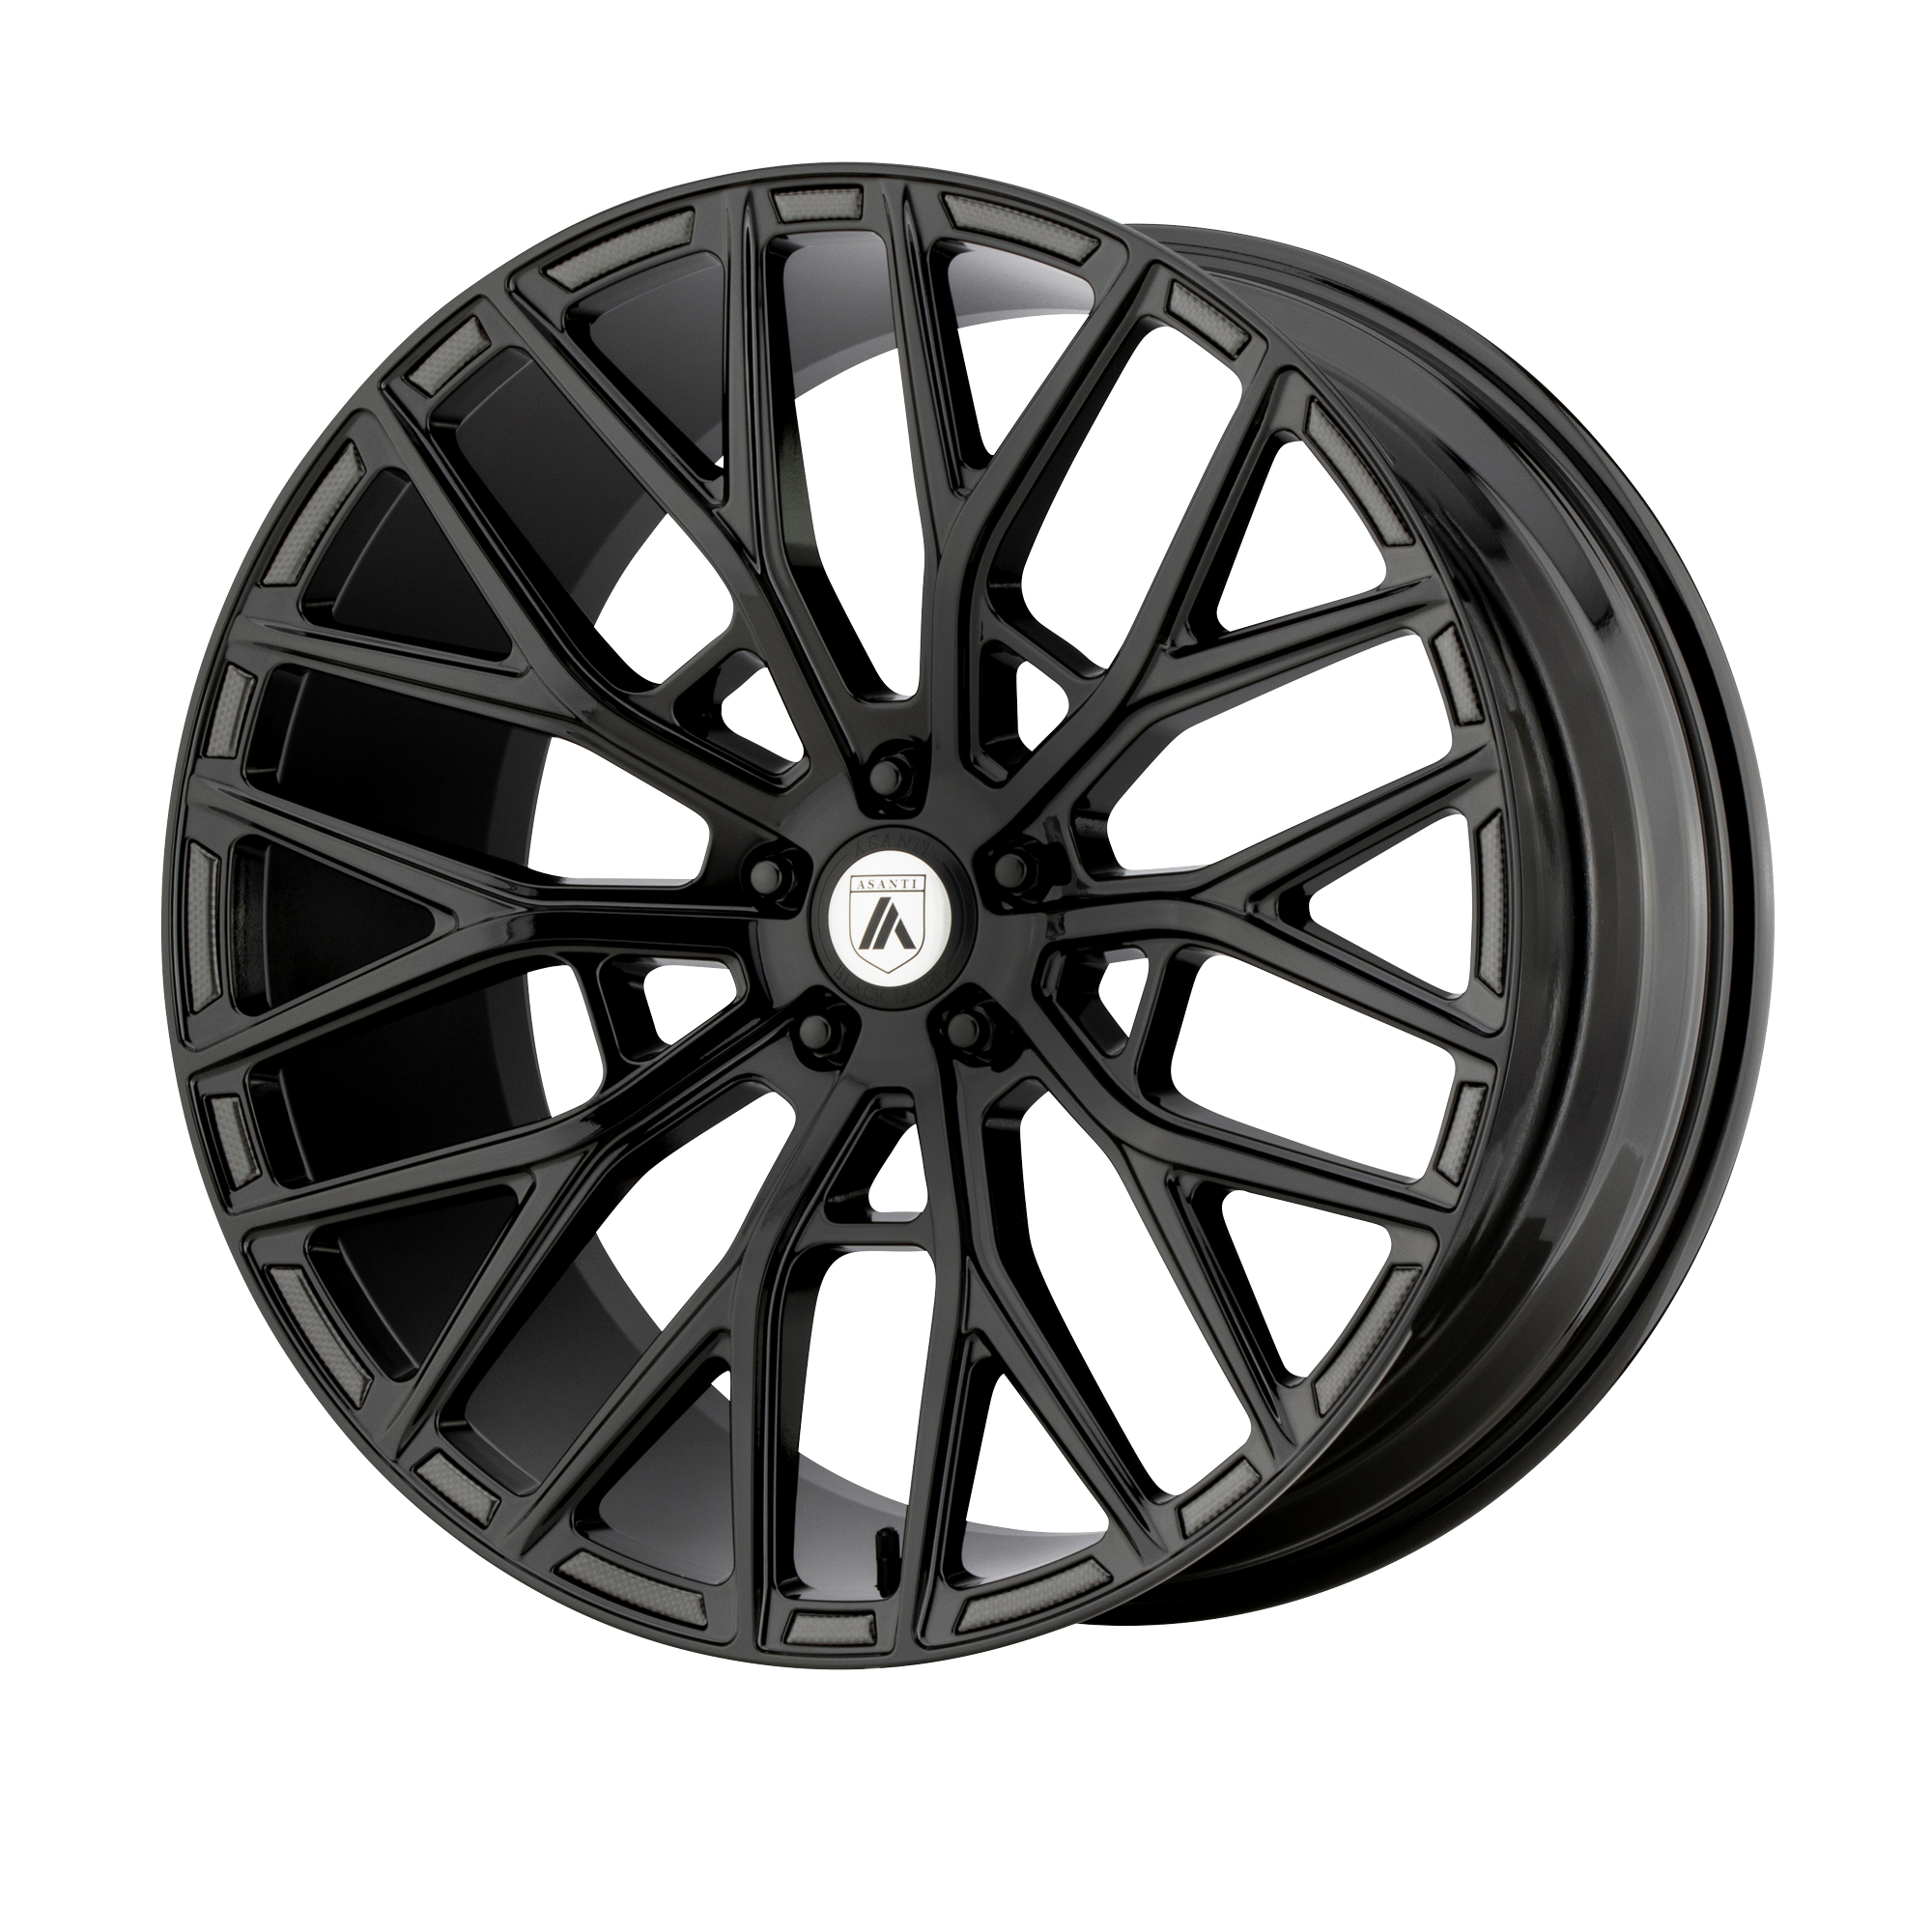 LEO 20x9 5x120.00 GLOSS BLACK (35 mm) - Tires and Engine Performance